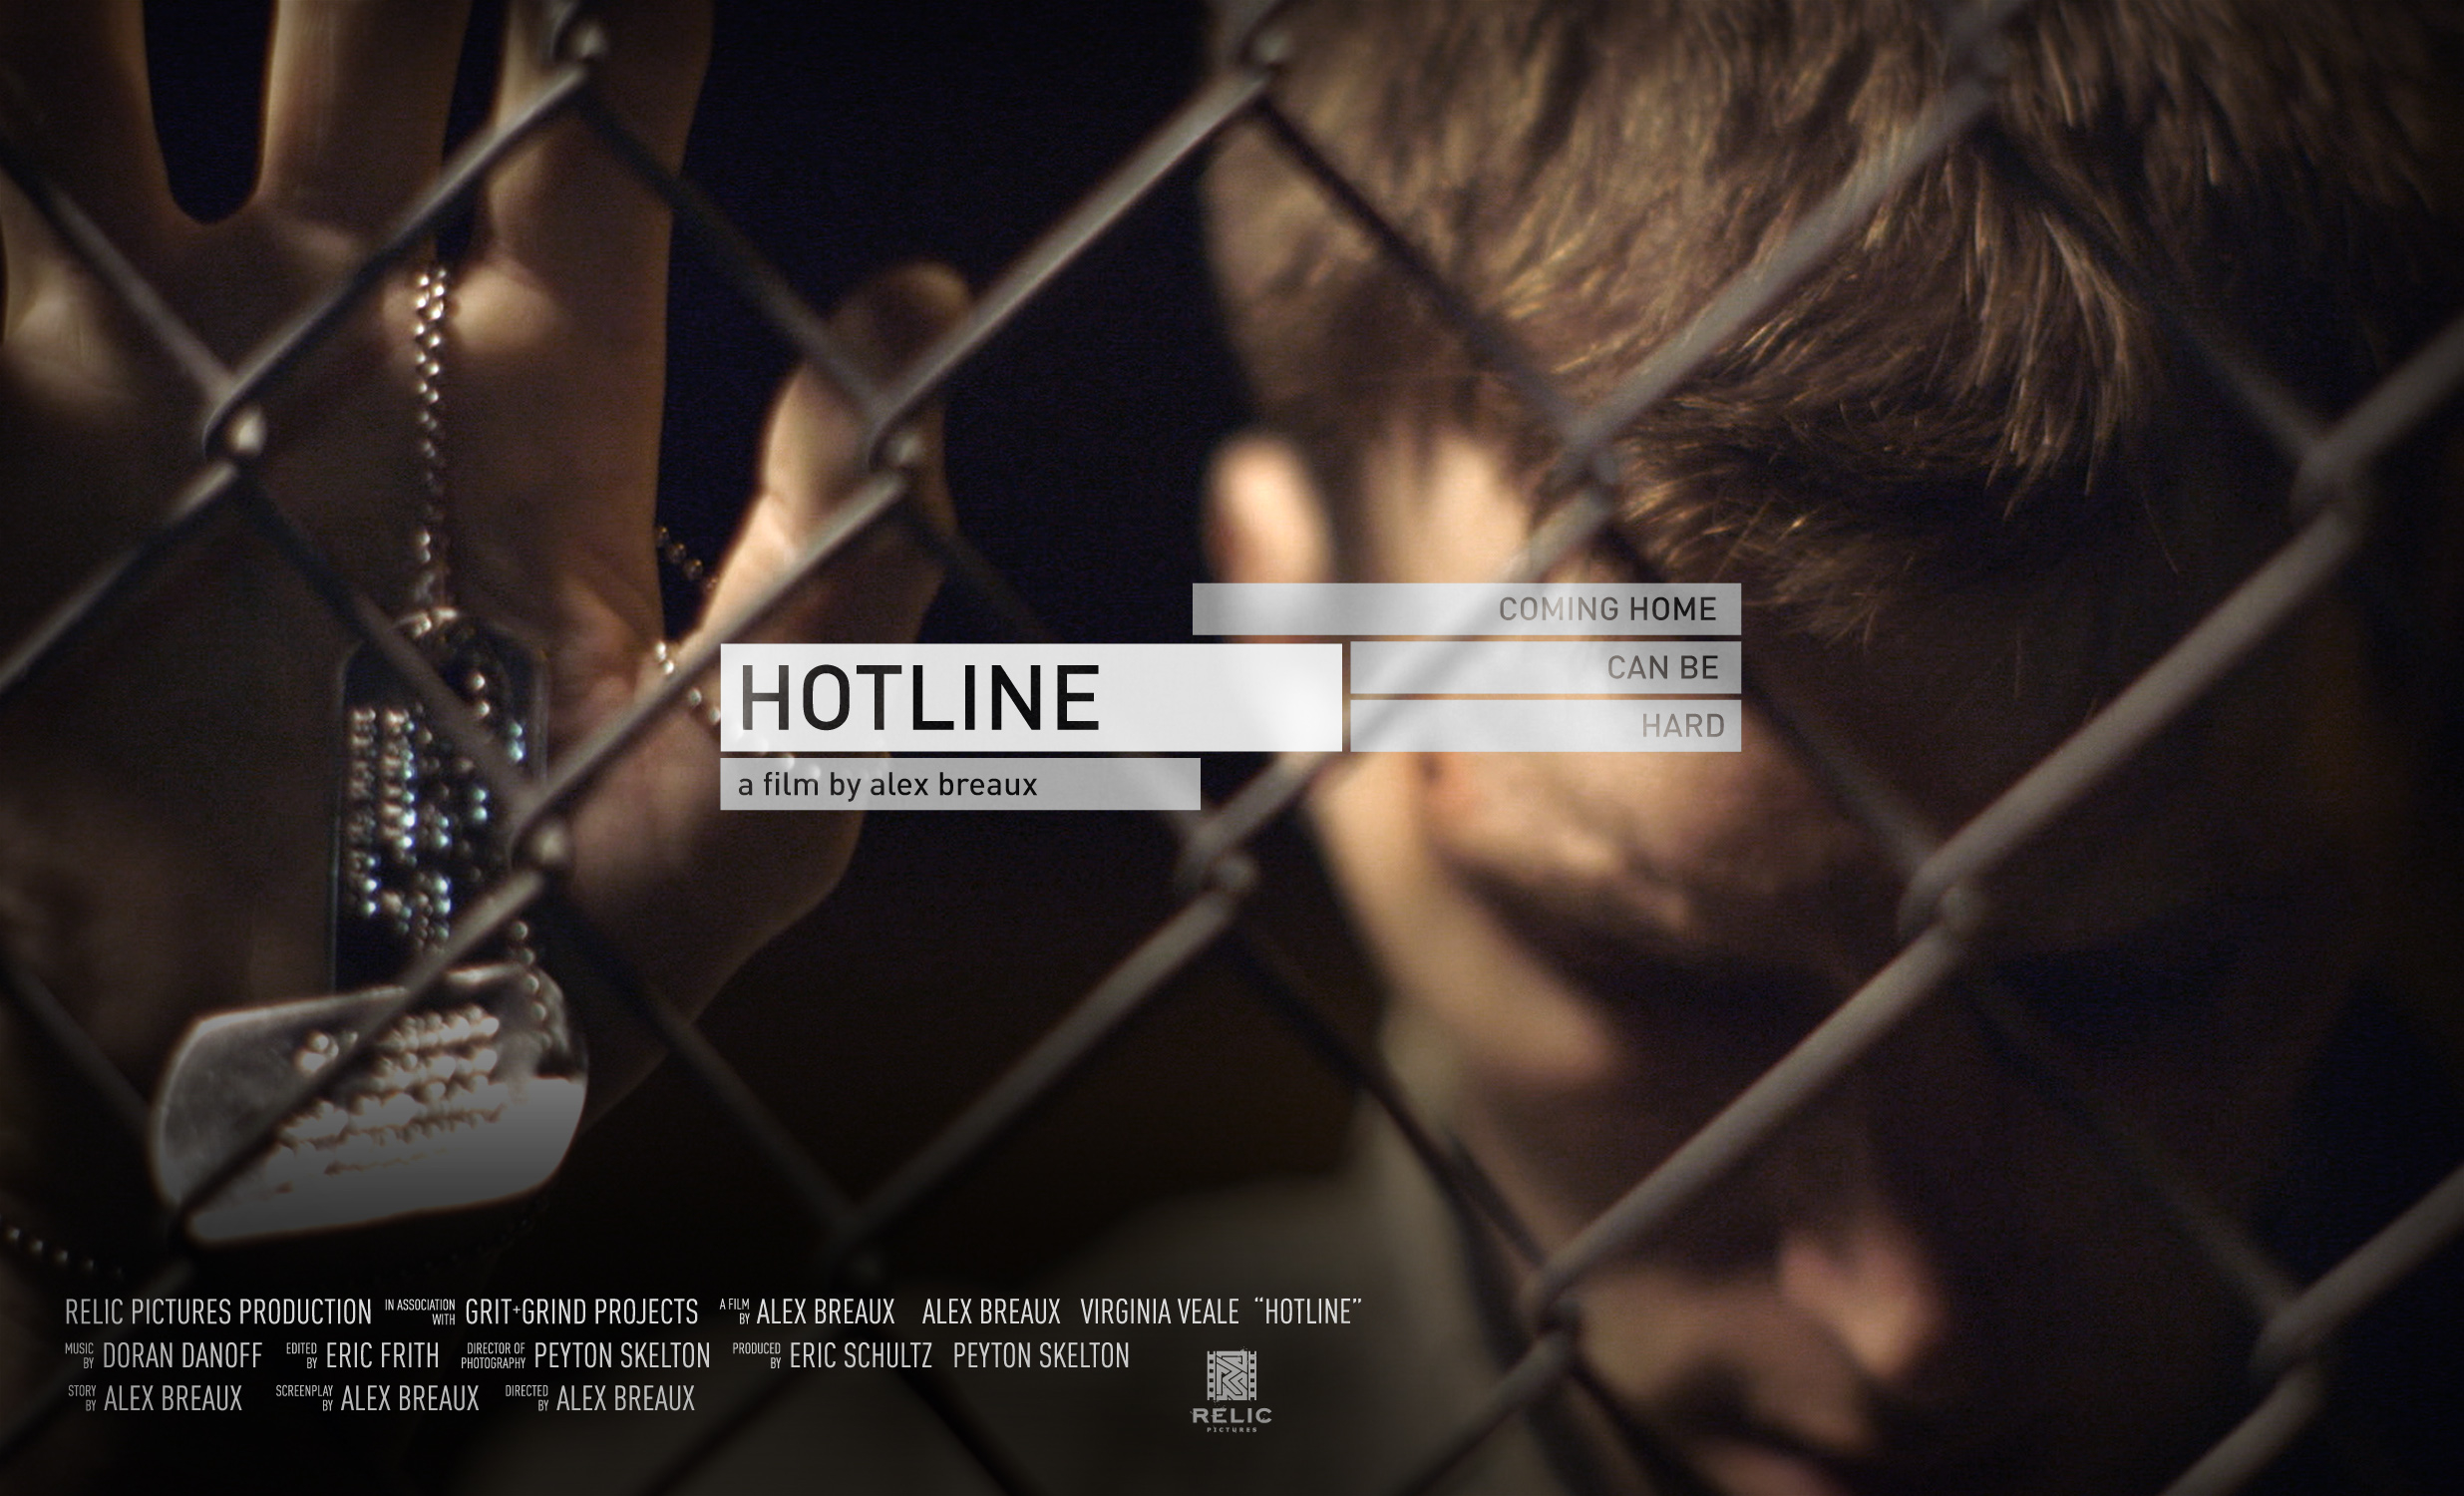 HOTLINE ...coming home can be hard.